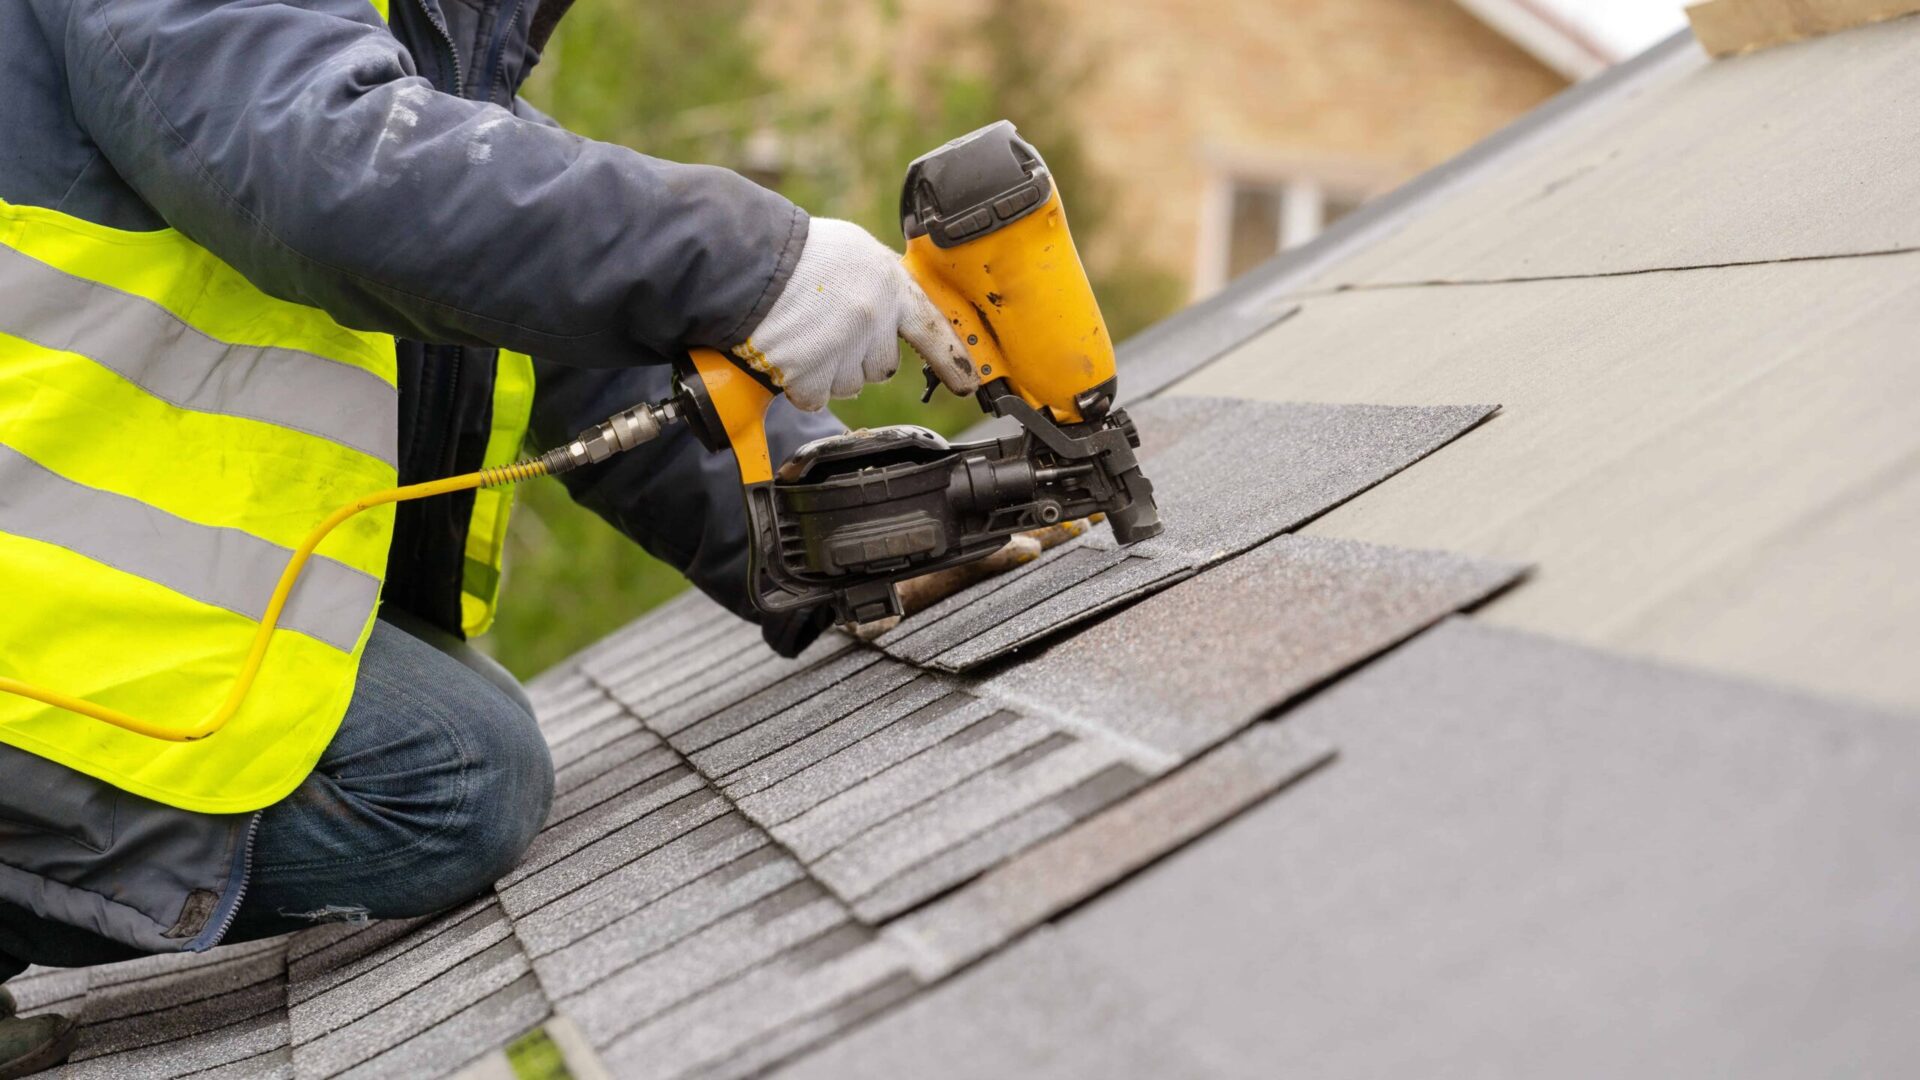 HOW LONG A ROOF REPLACEMENT TAKES?